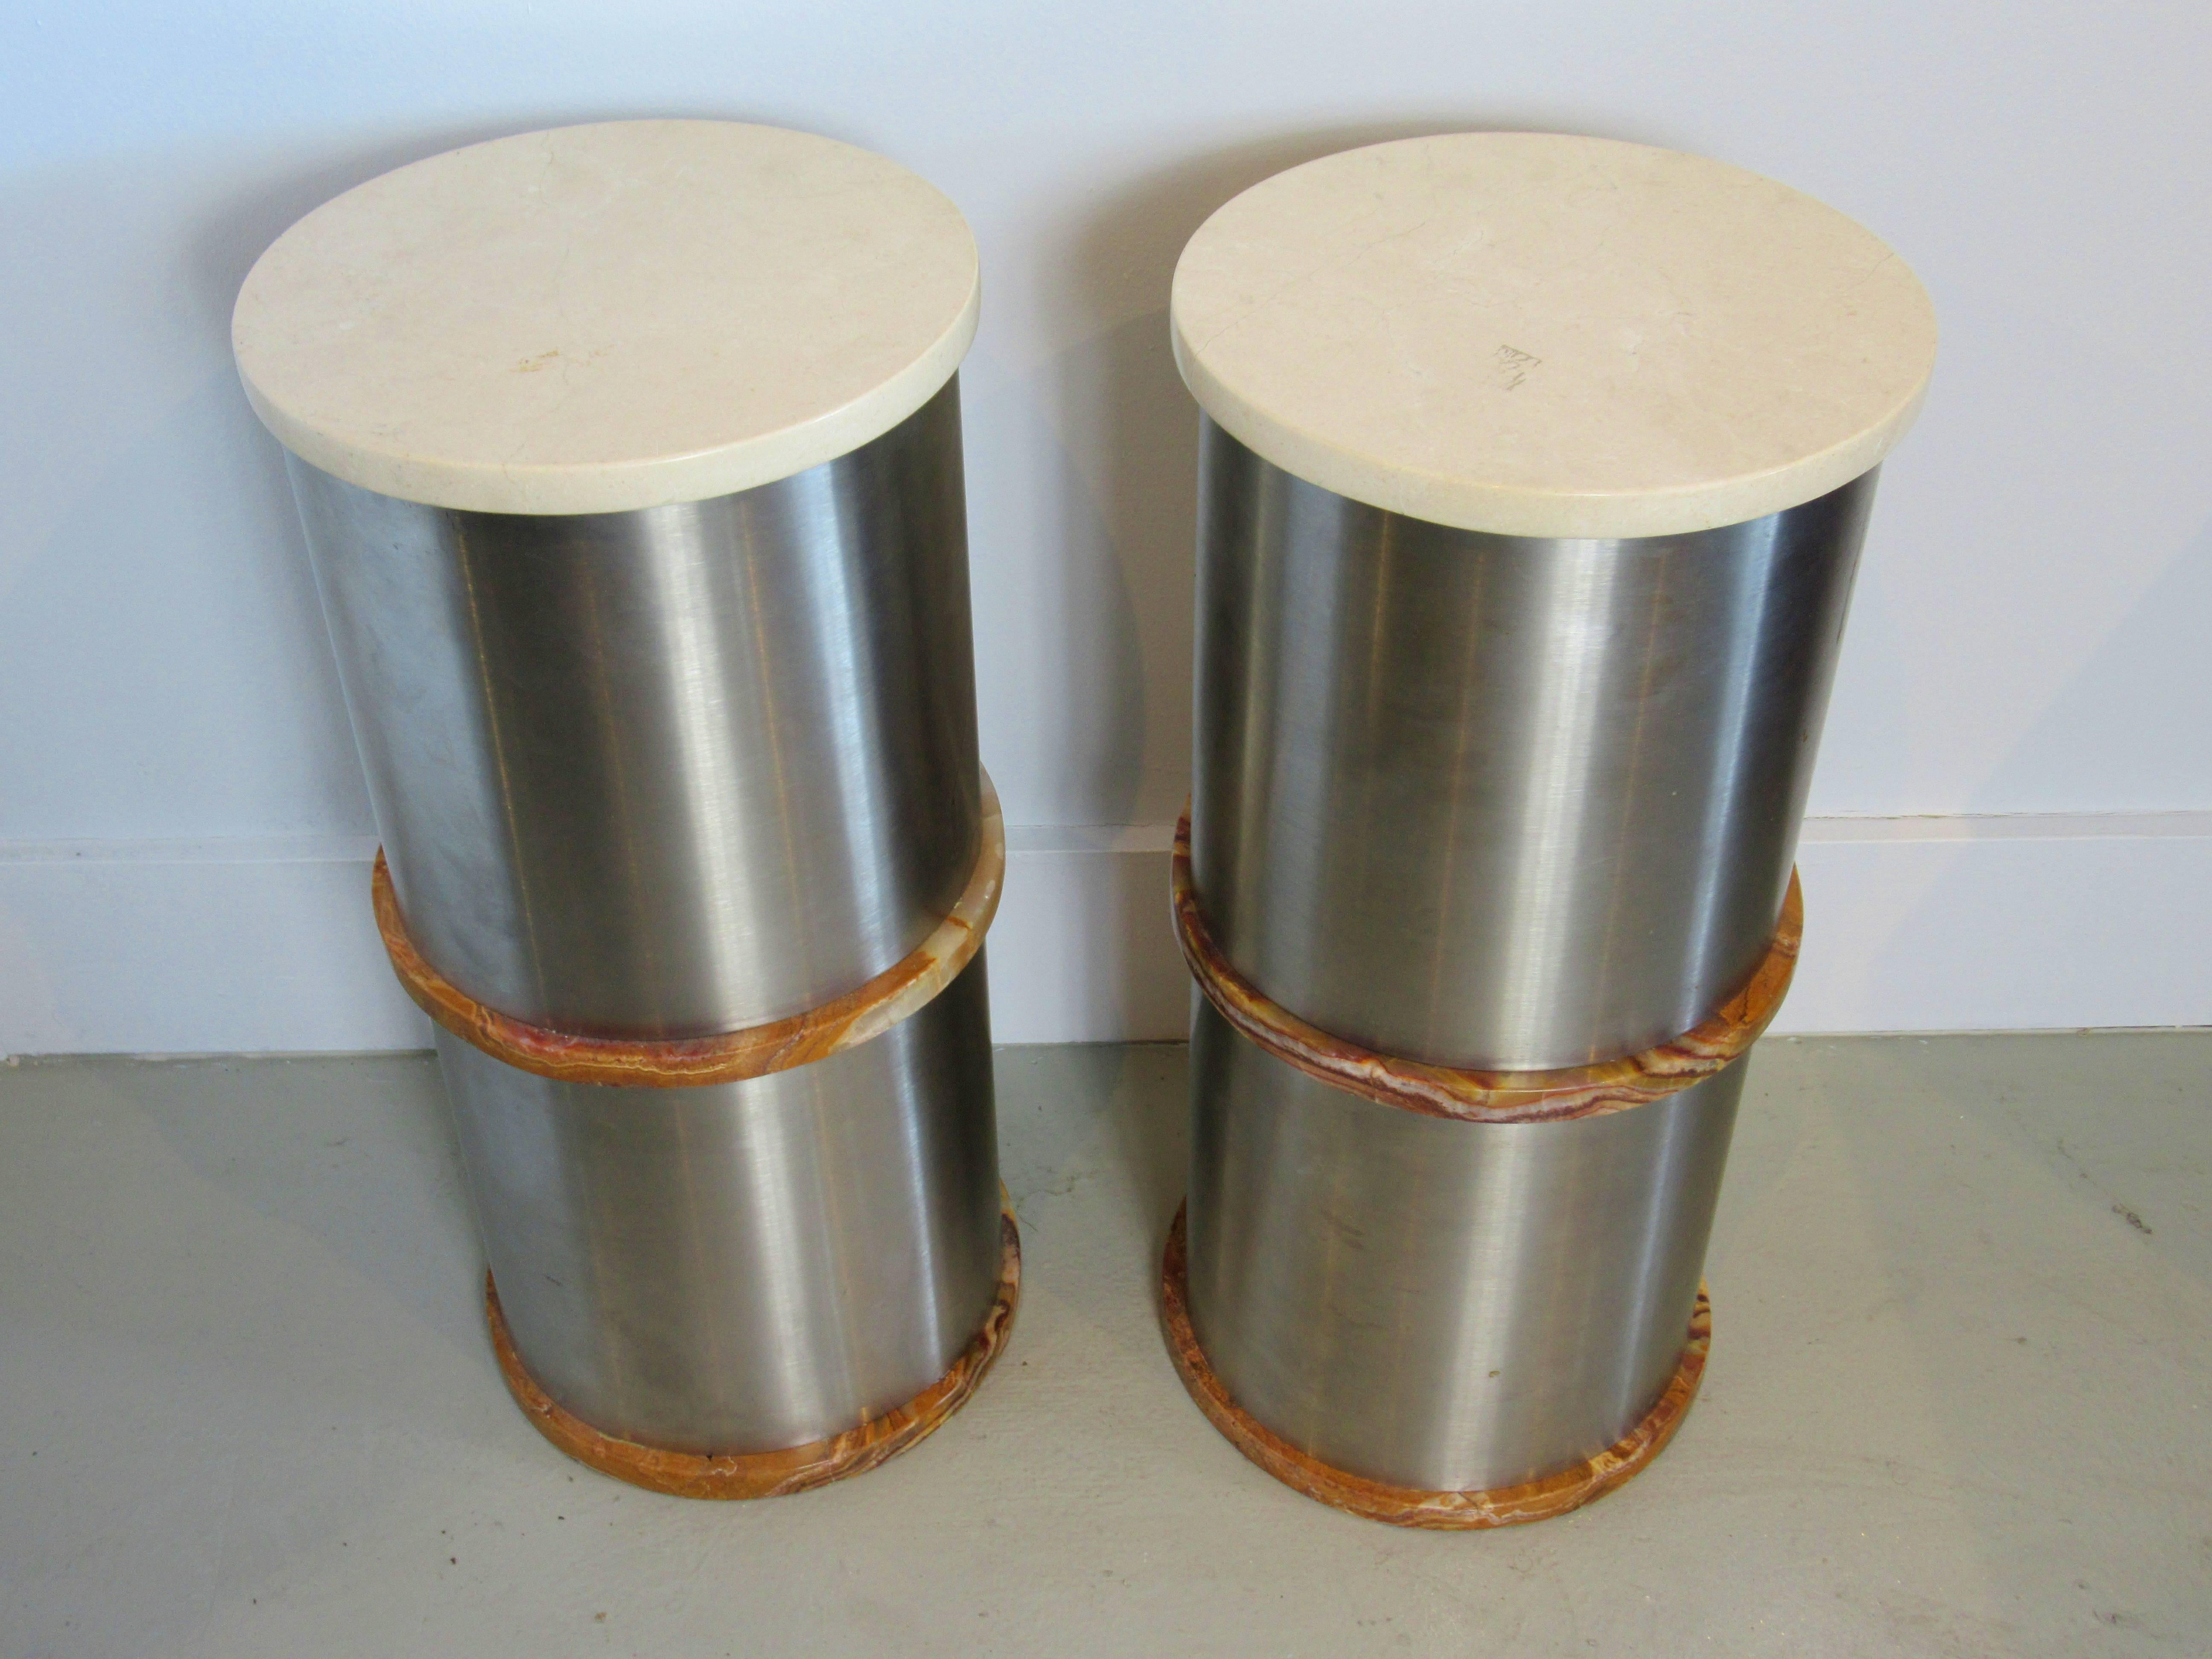 Pair of Italian Modern Stainless Steel Travertine and Onyx Side Tables, Saporiti 2